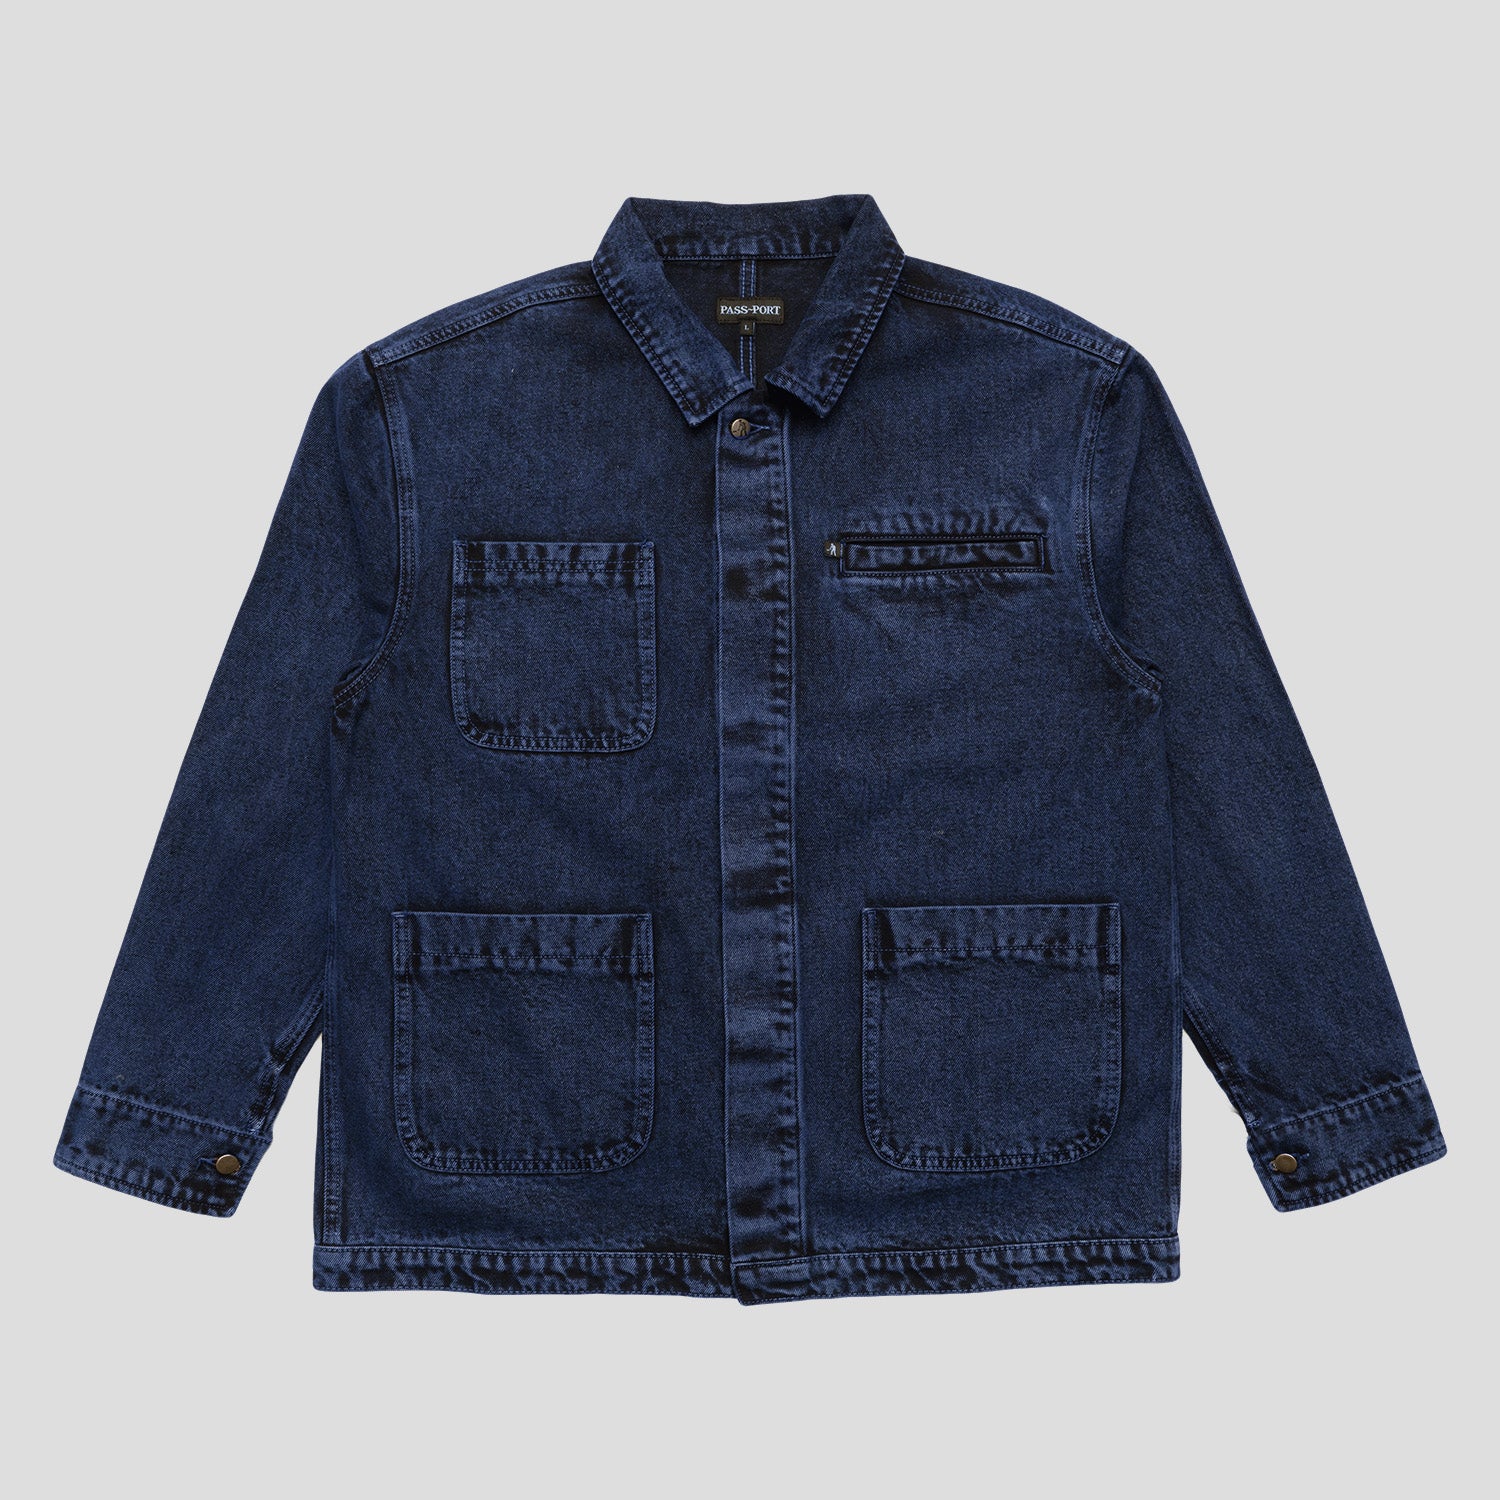 Pass~Port Painters Jacket - Navy Over-Dye